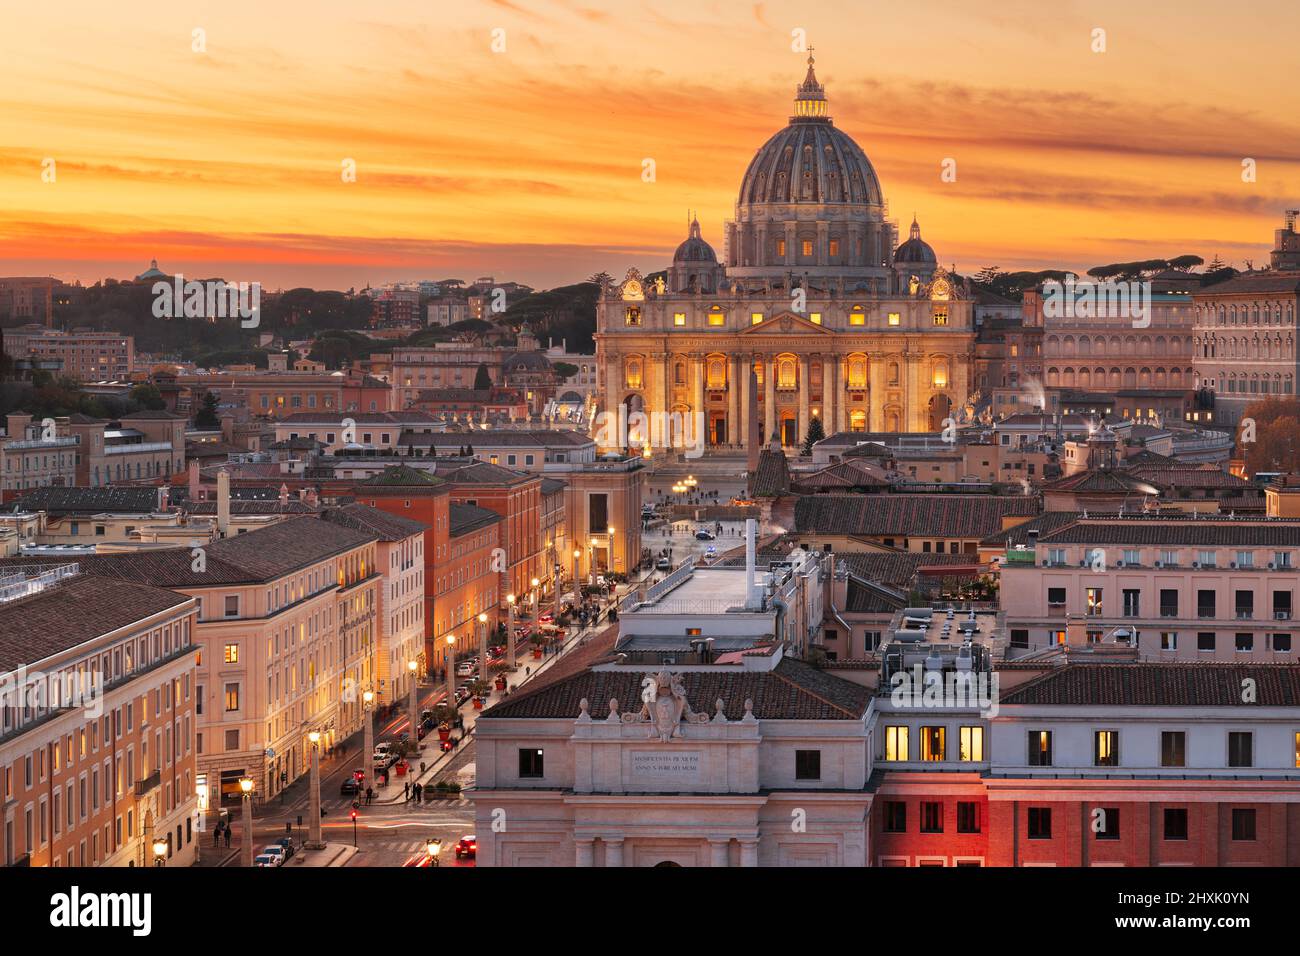 Vatican City skyline with St. Peter's Basilica during sunset. Stock Photo